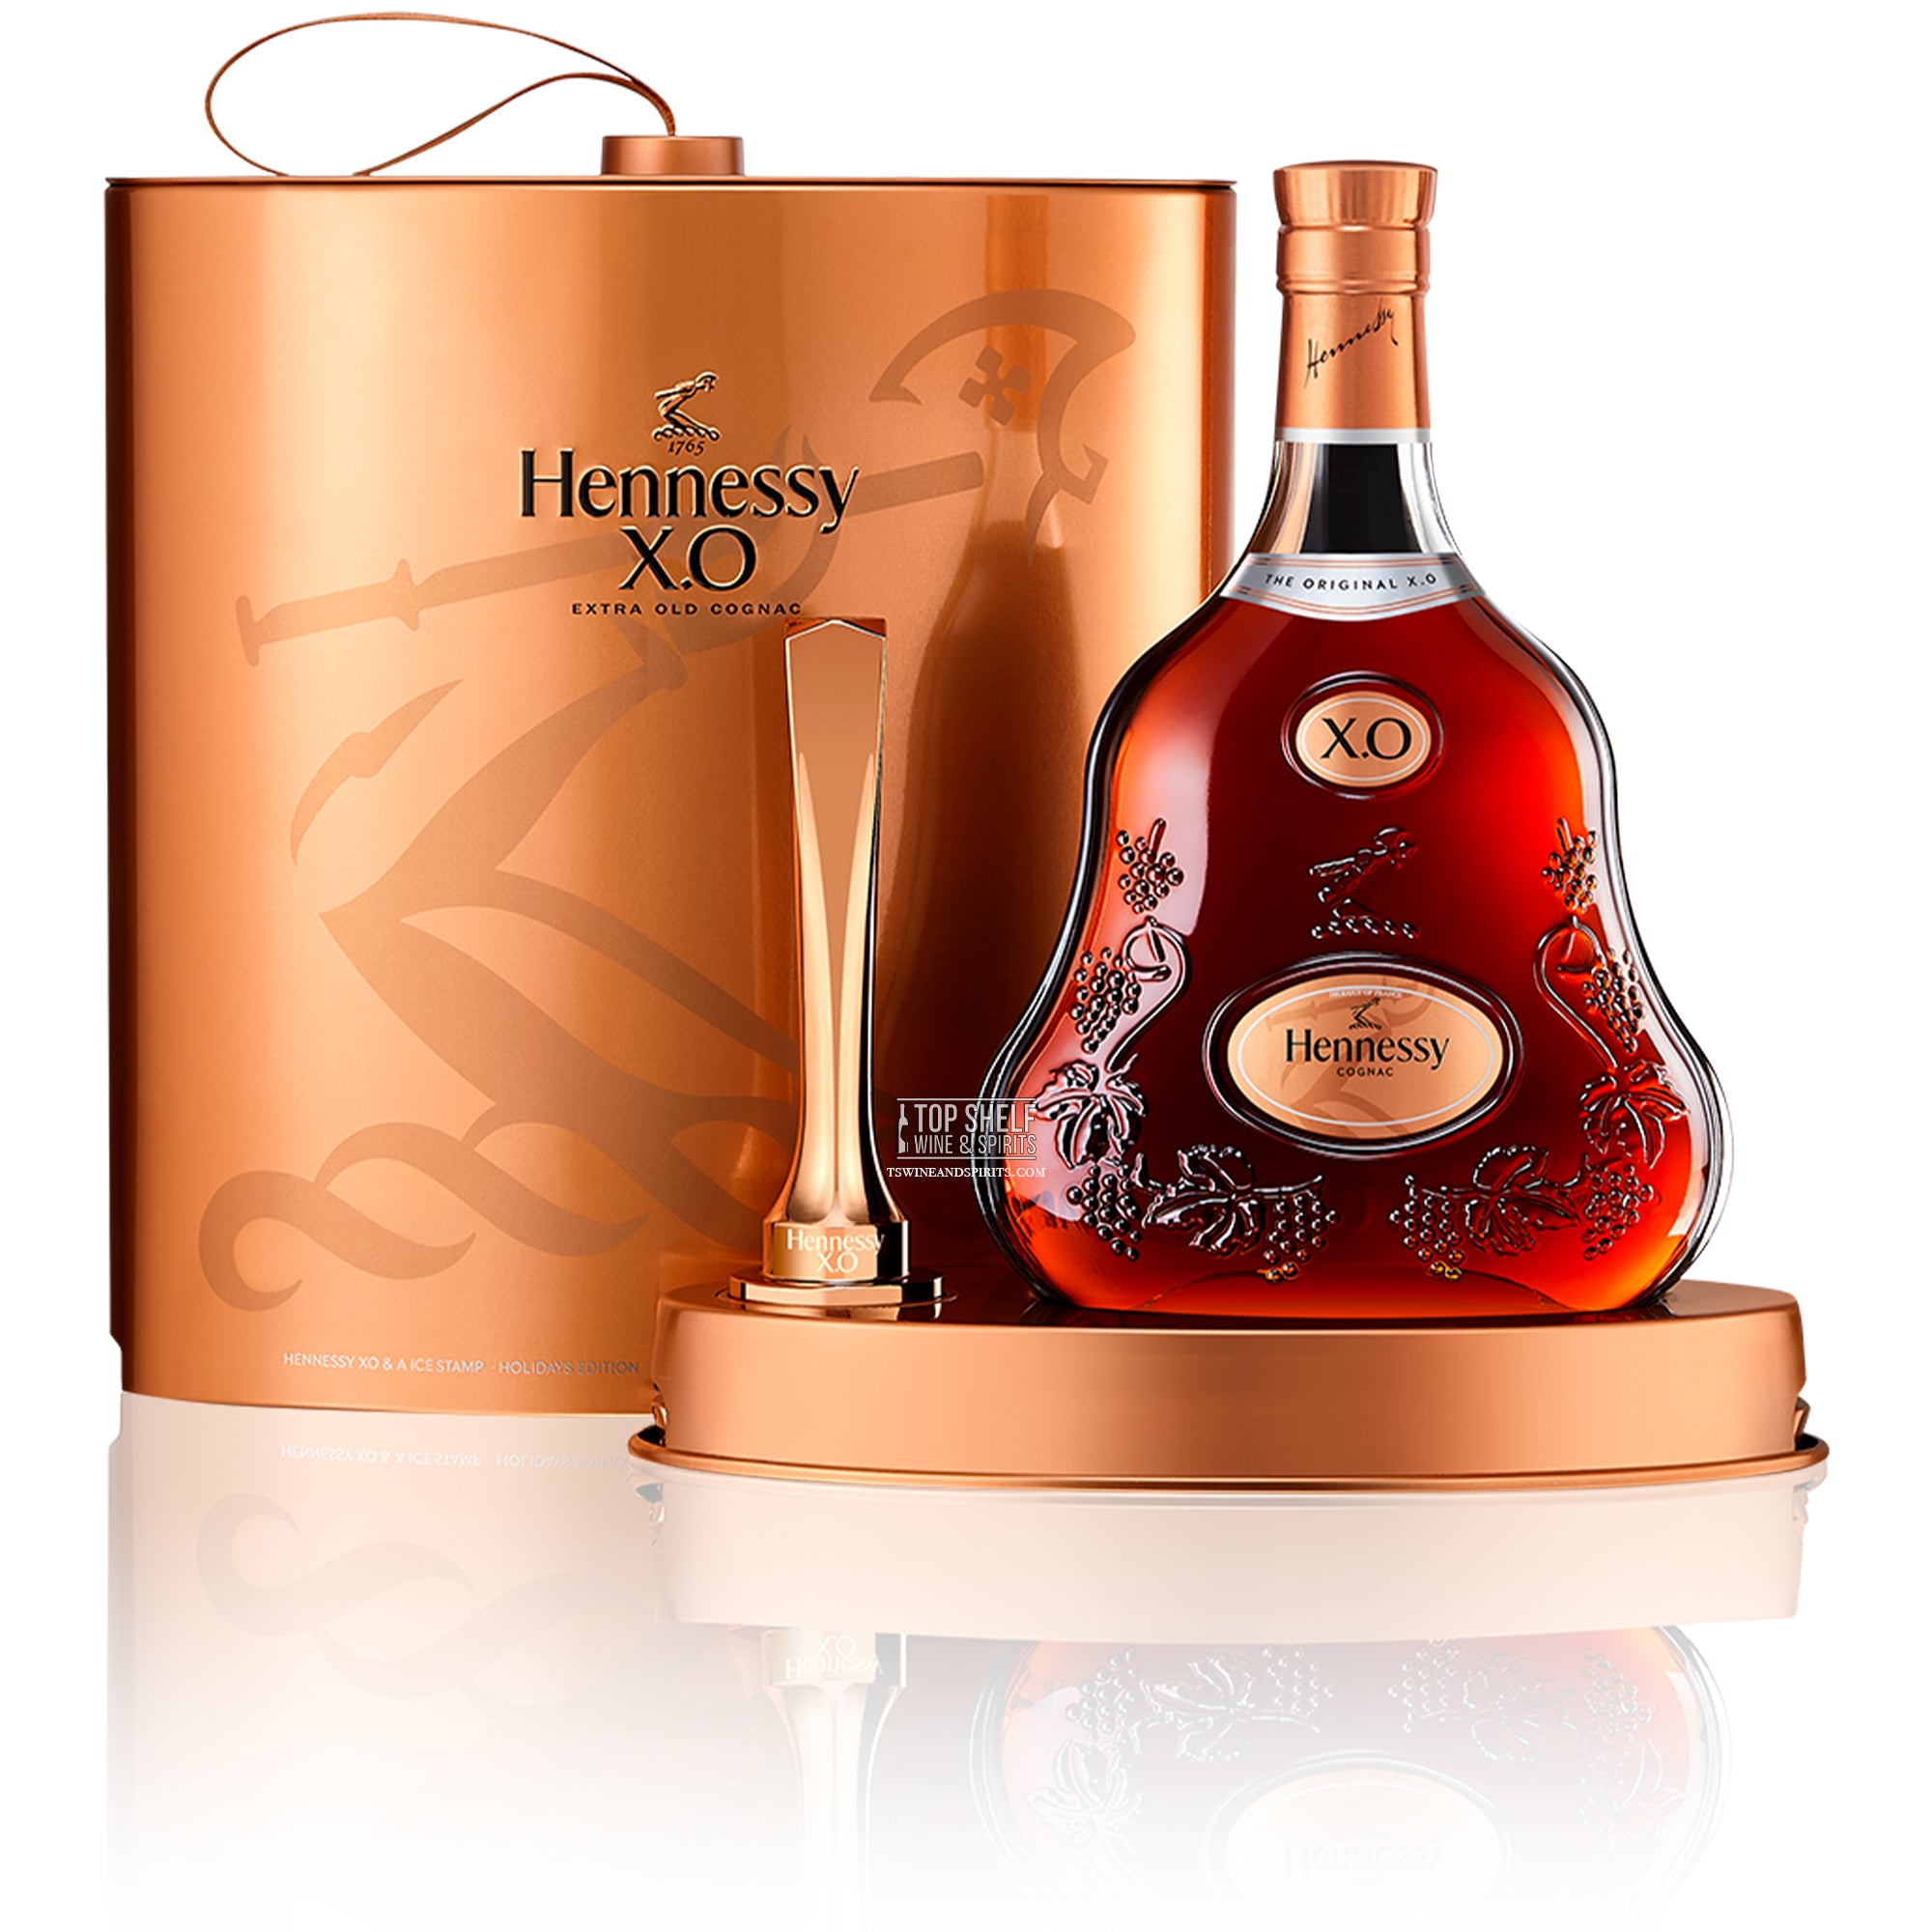 Moët Hennessy marks Hip Hop's birthday with HenNASsy Cognac pack